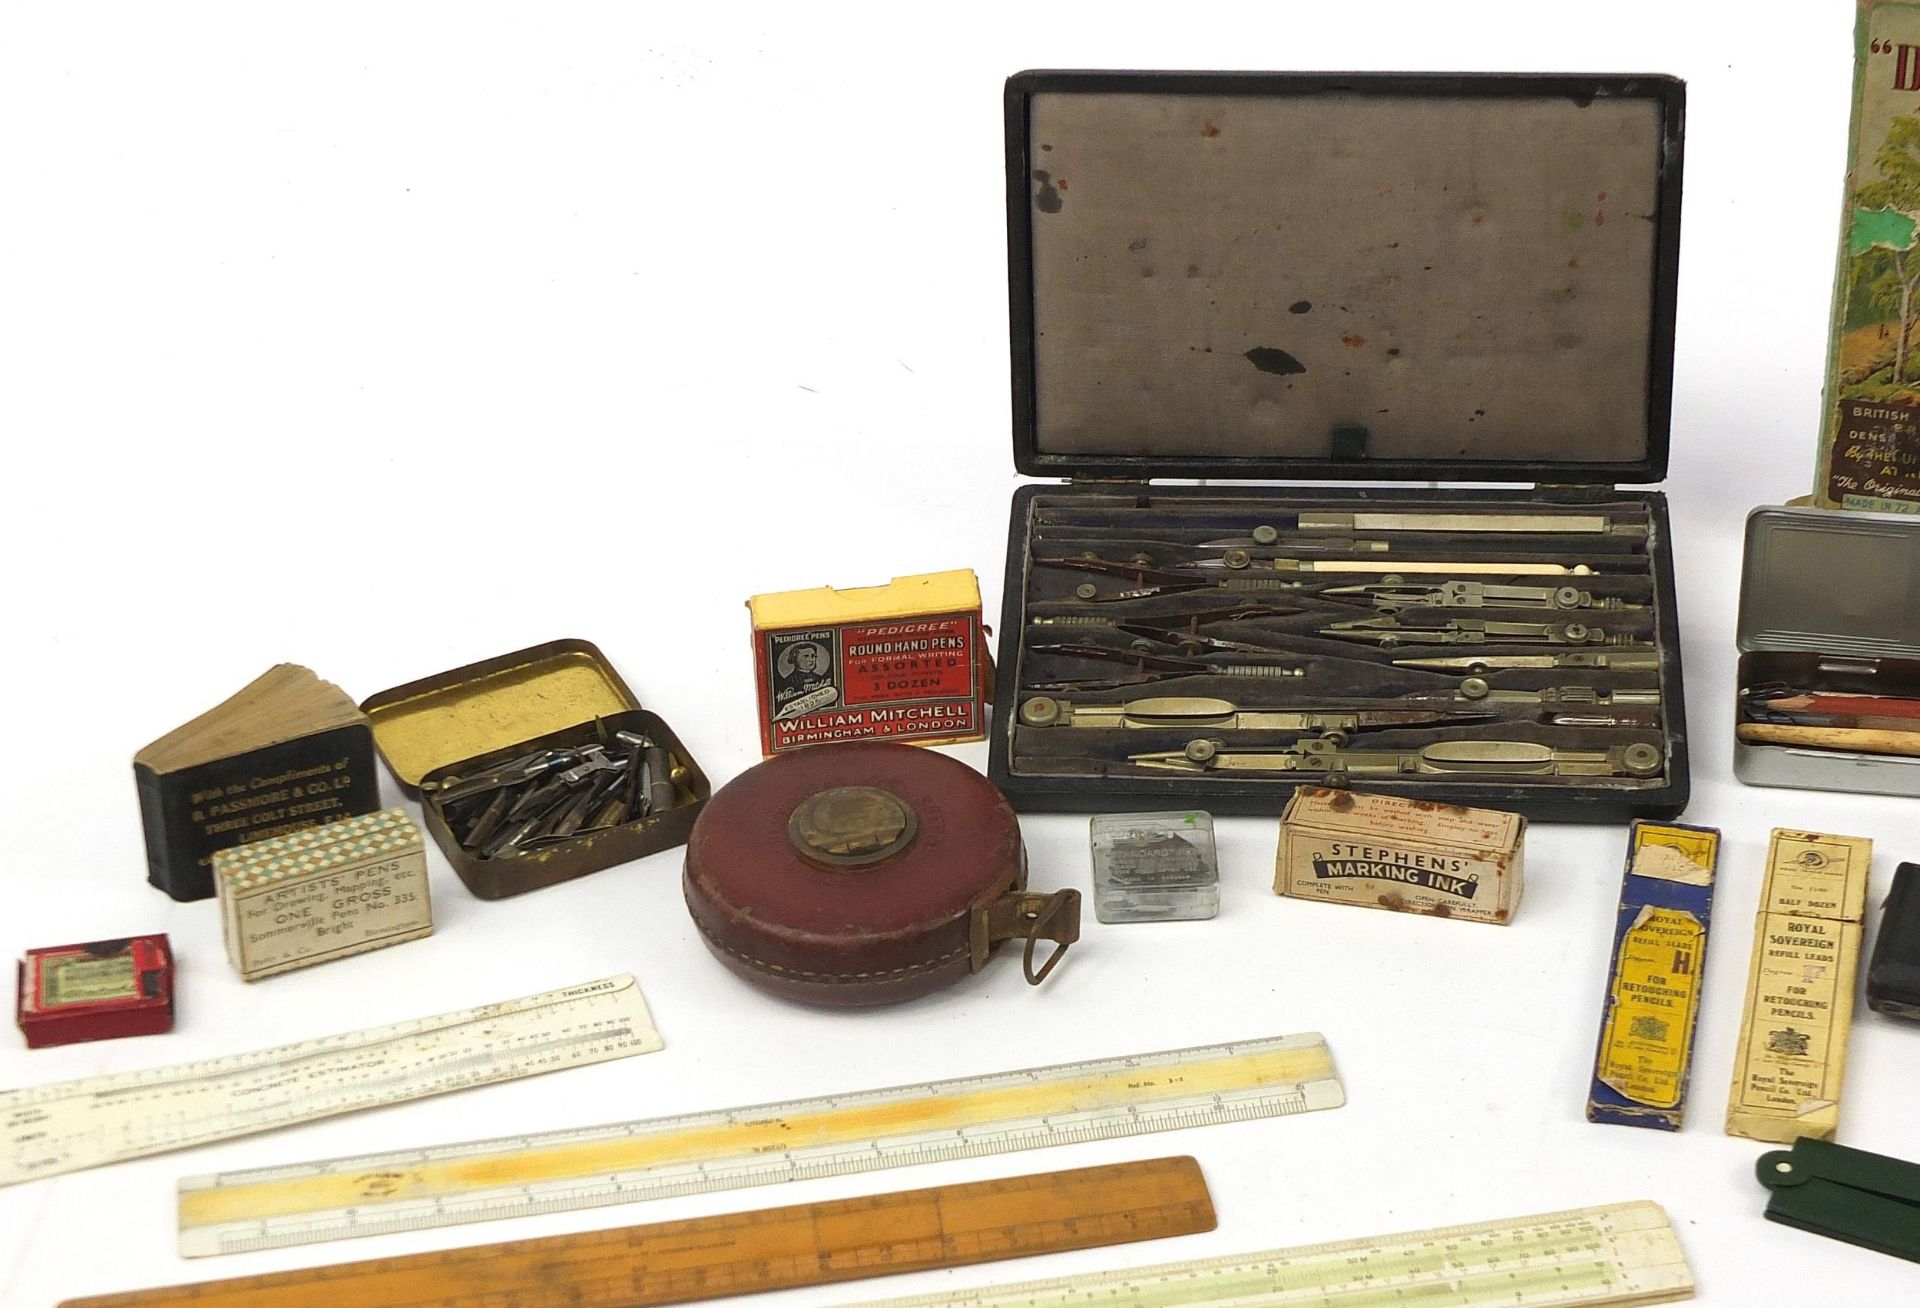 Vintage drawing instruments and apparatus including cased sets and wooden rules - Image 3 of 5